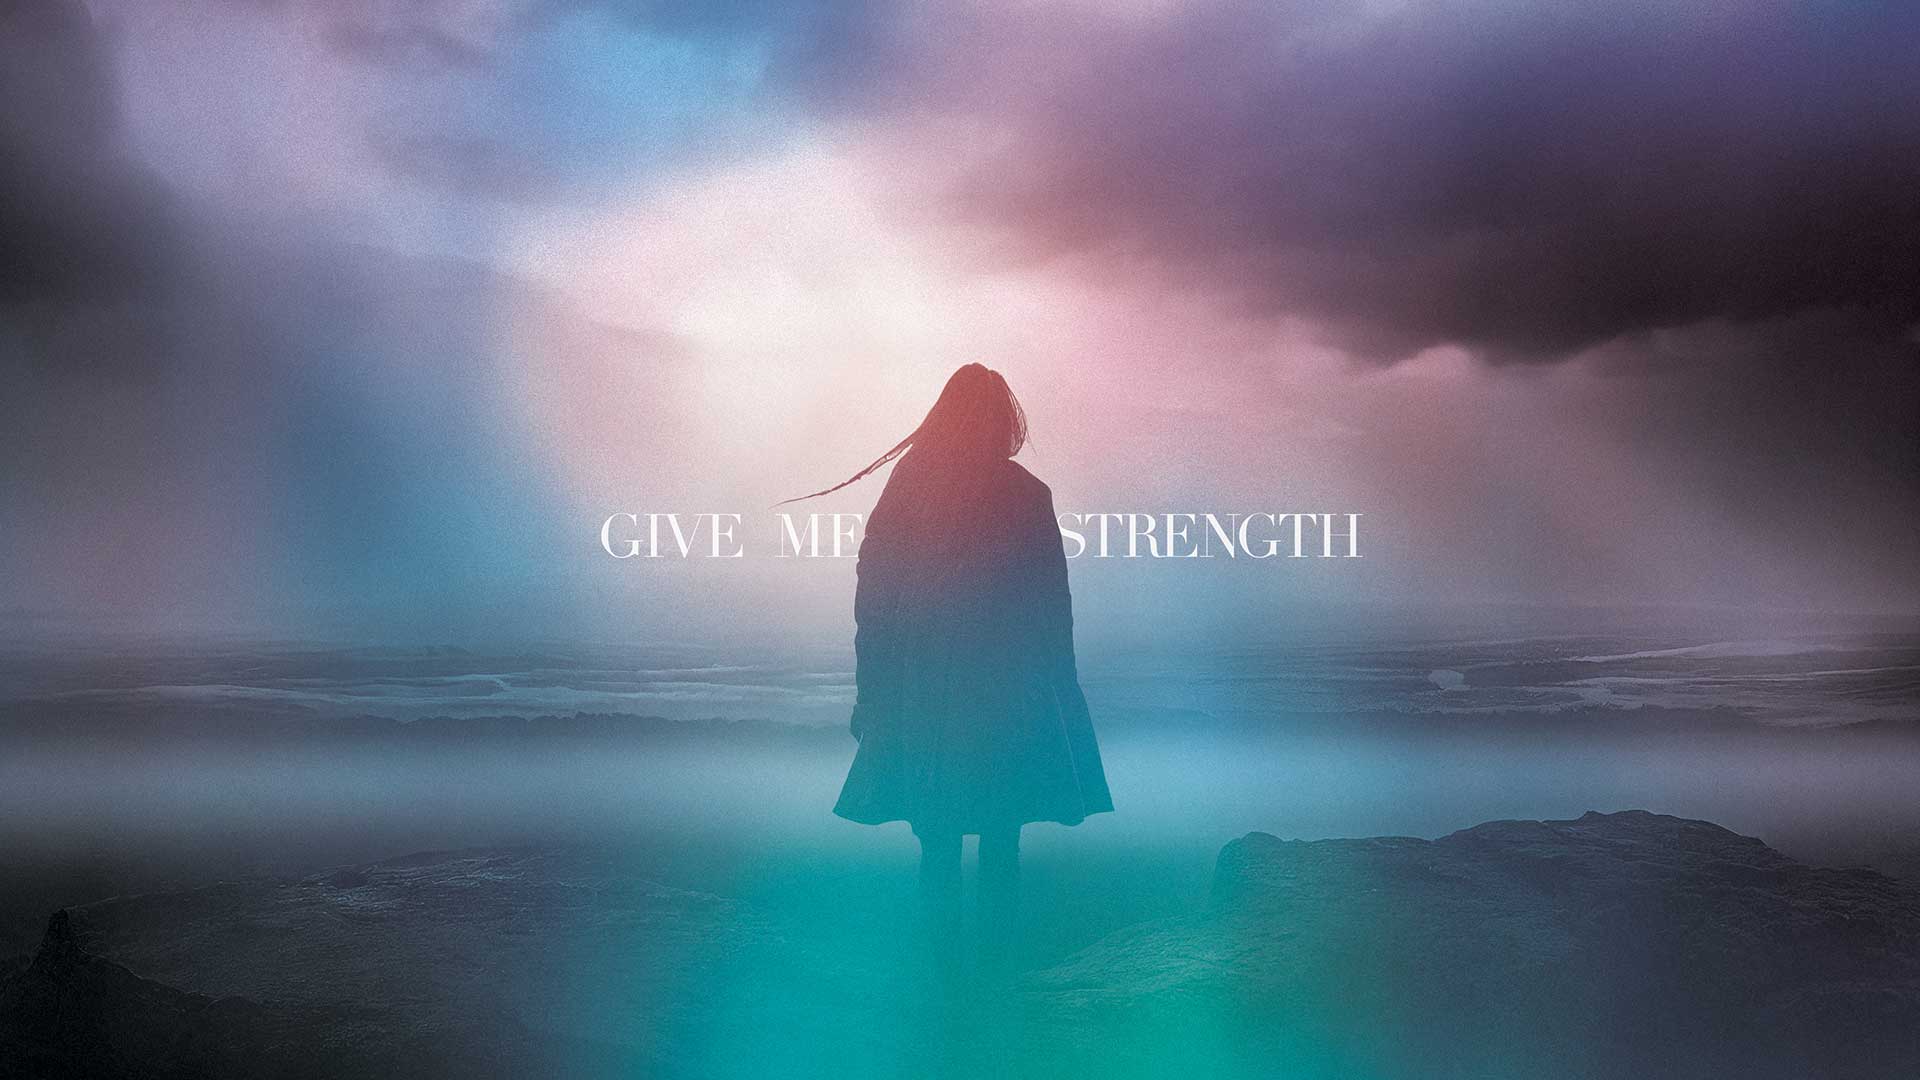 Give-Me-Strength-1920x1080-web